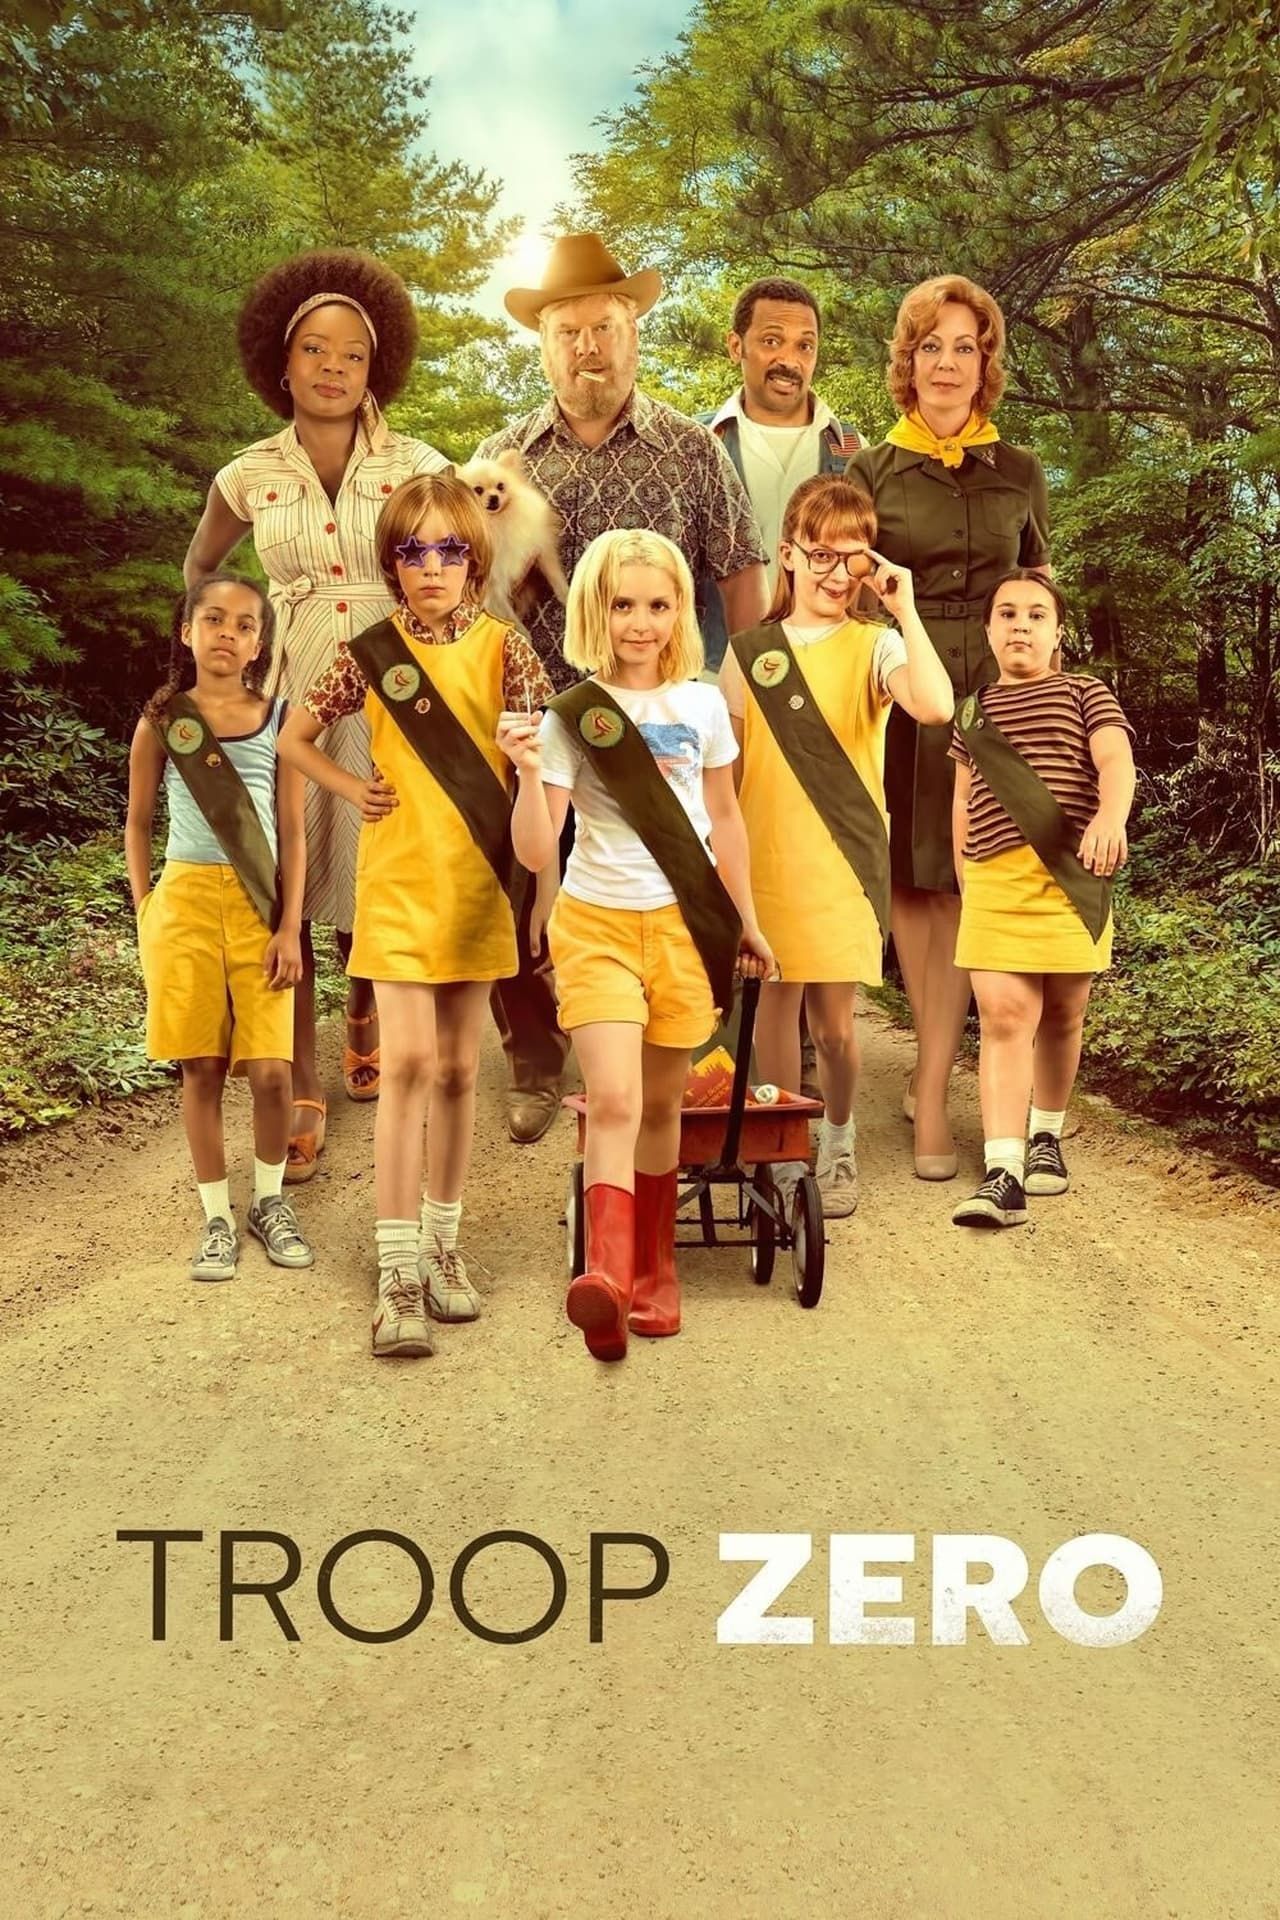 Troop Zero Movie Poster Showing Mckenna Grace with Girl Scouts